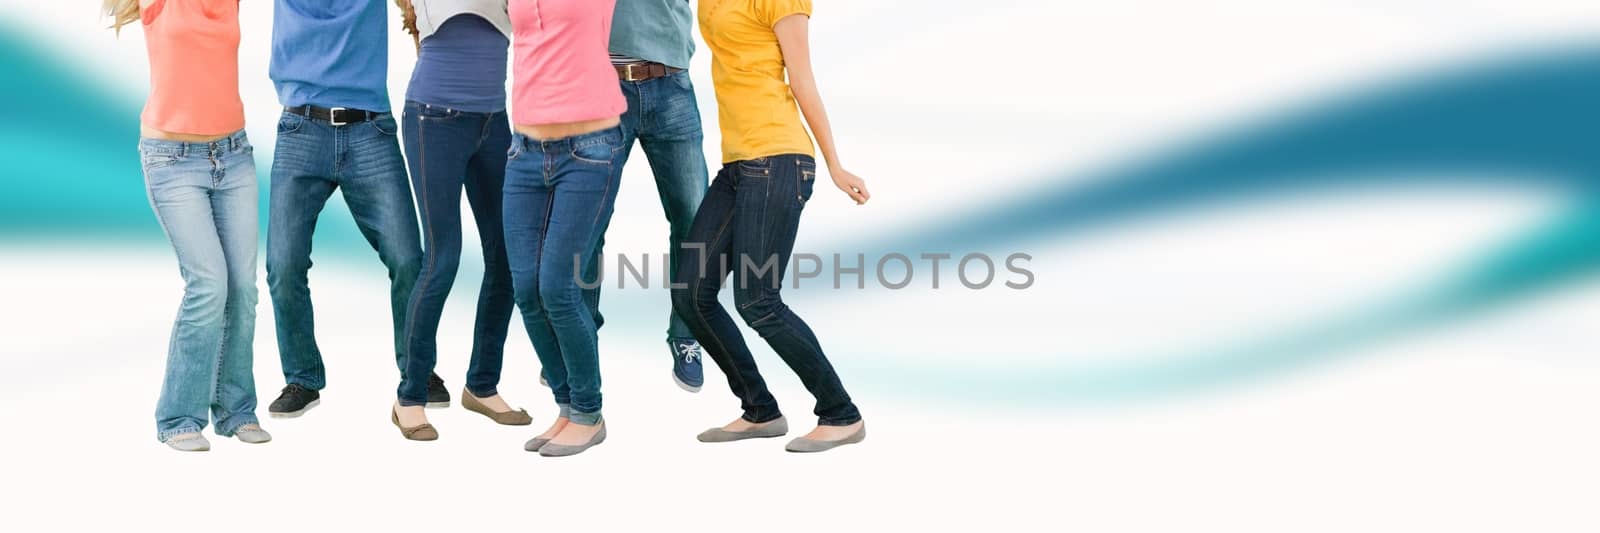 Group of People standing with curved background by Wavebreakmedia